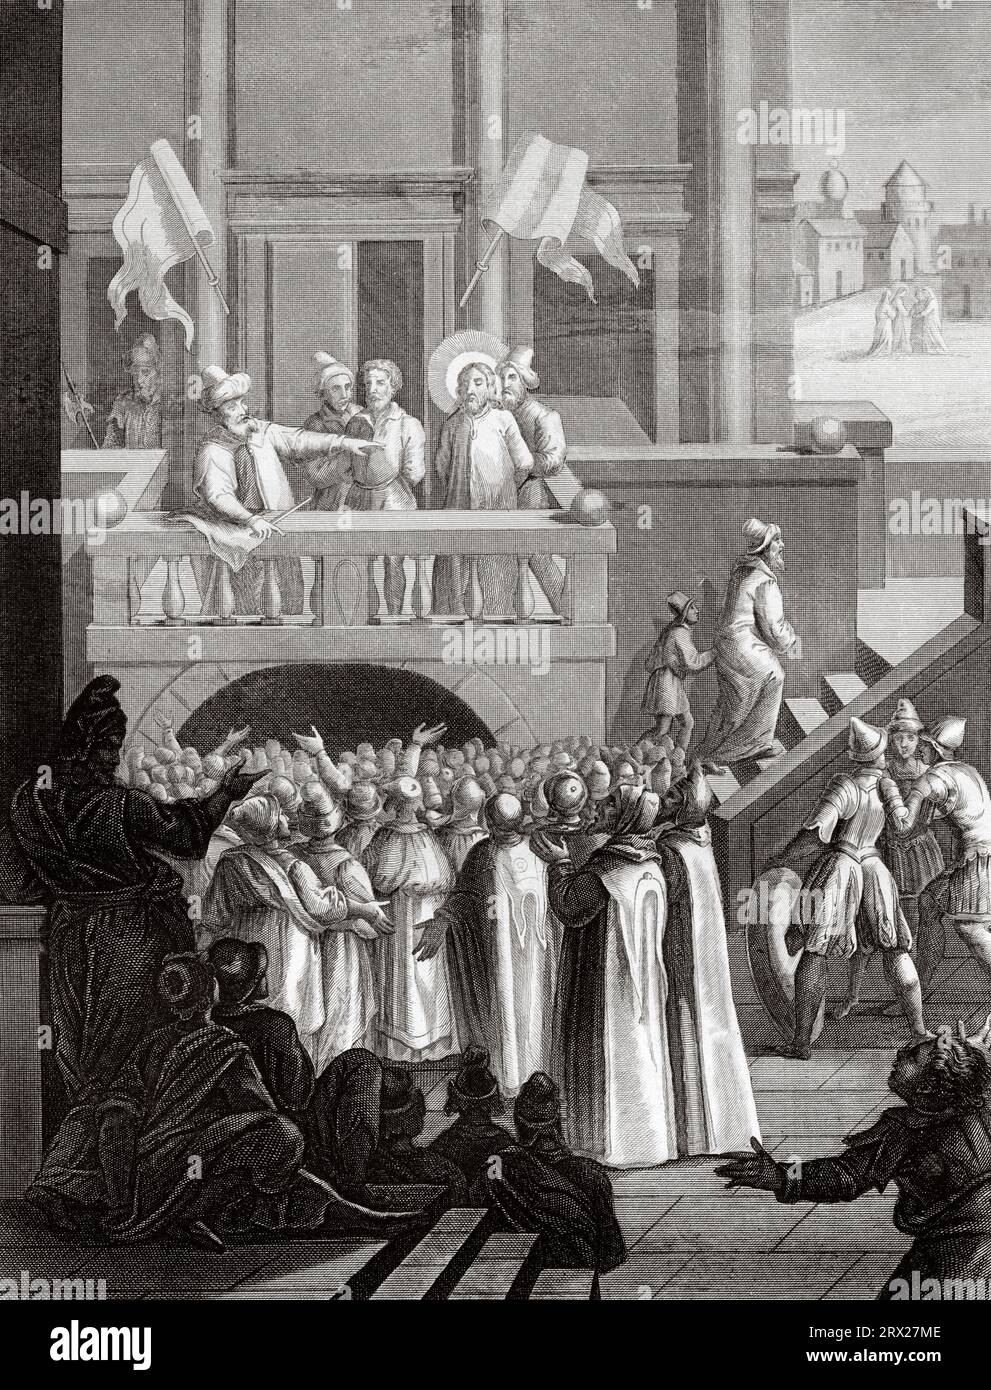 The crowd chooses Barabbas to be released and Jesus of Nazareth to be crucified, court of Pontius Pilate. Illustration for The life of Our Lord Jesus Christ written by the four evangelists, 1853 Stock Photo